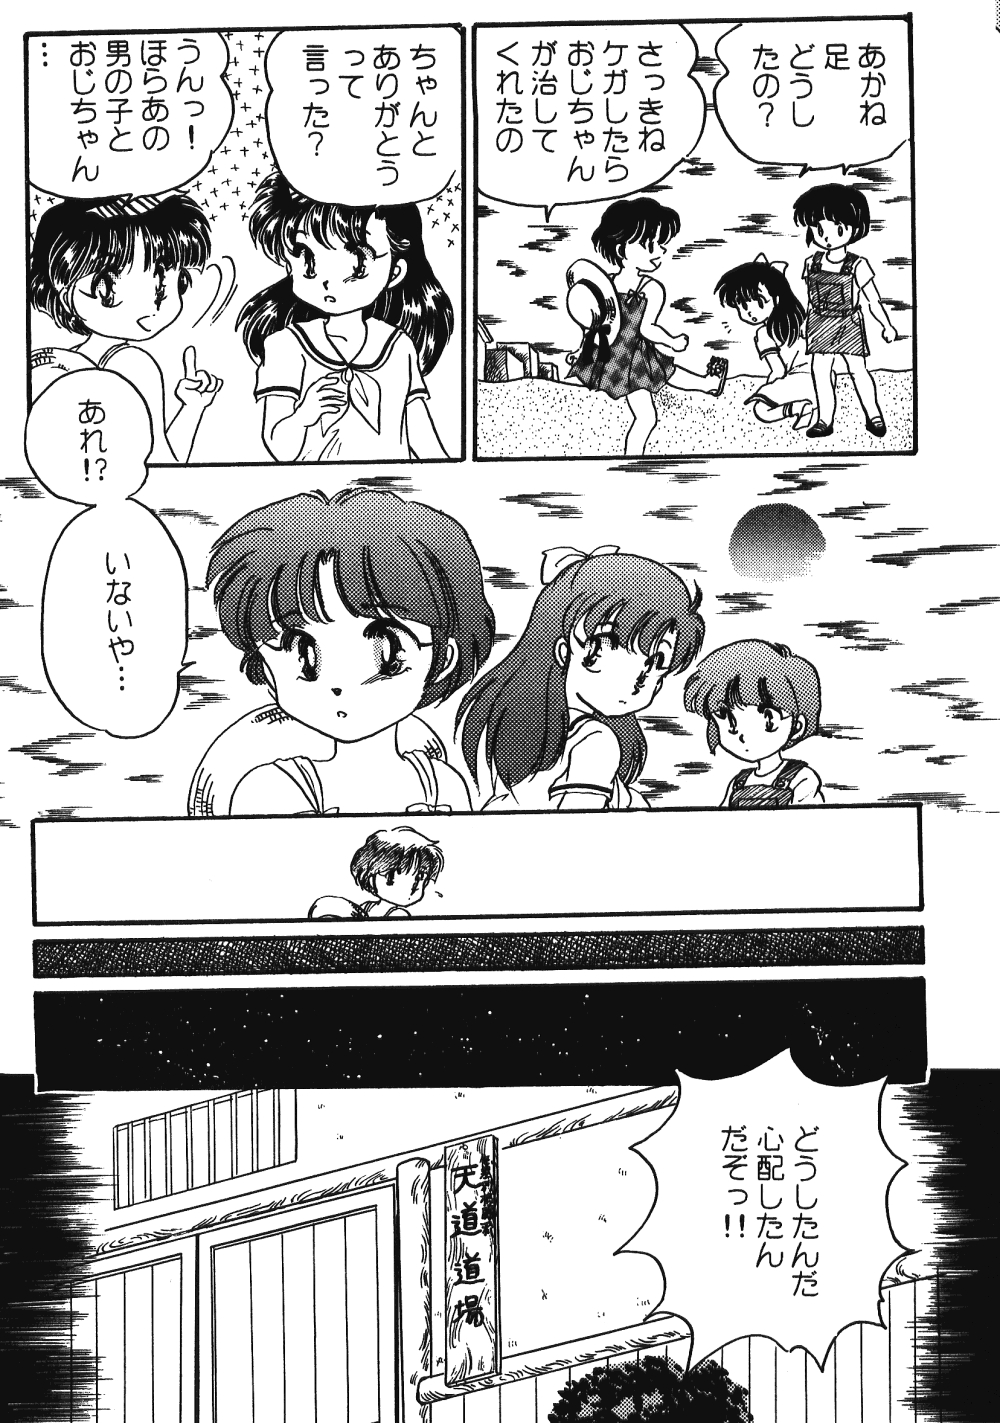 Never Forget Summer (Ranma 1/2) 18